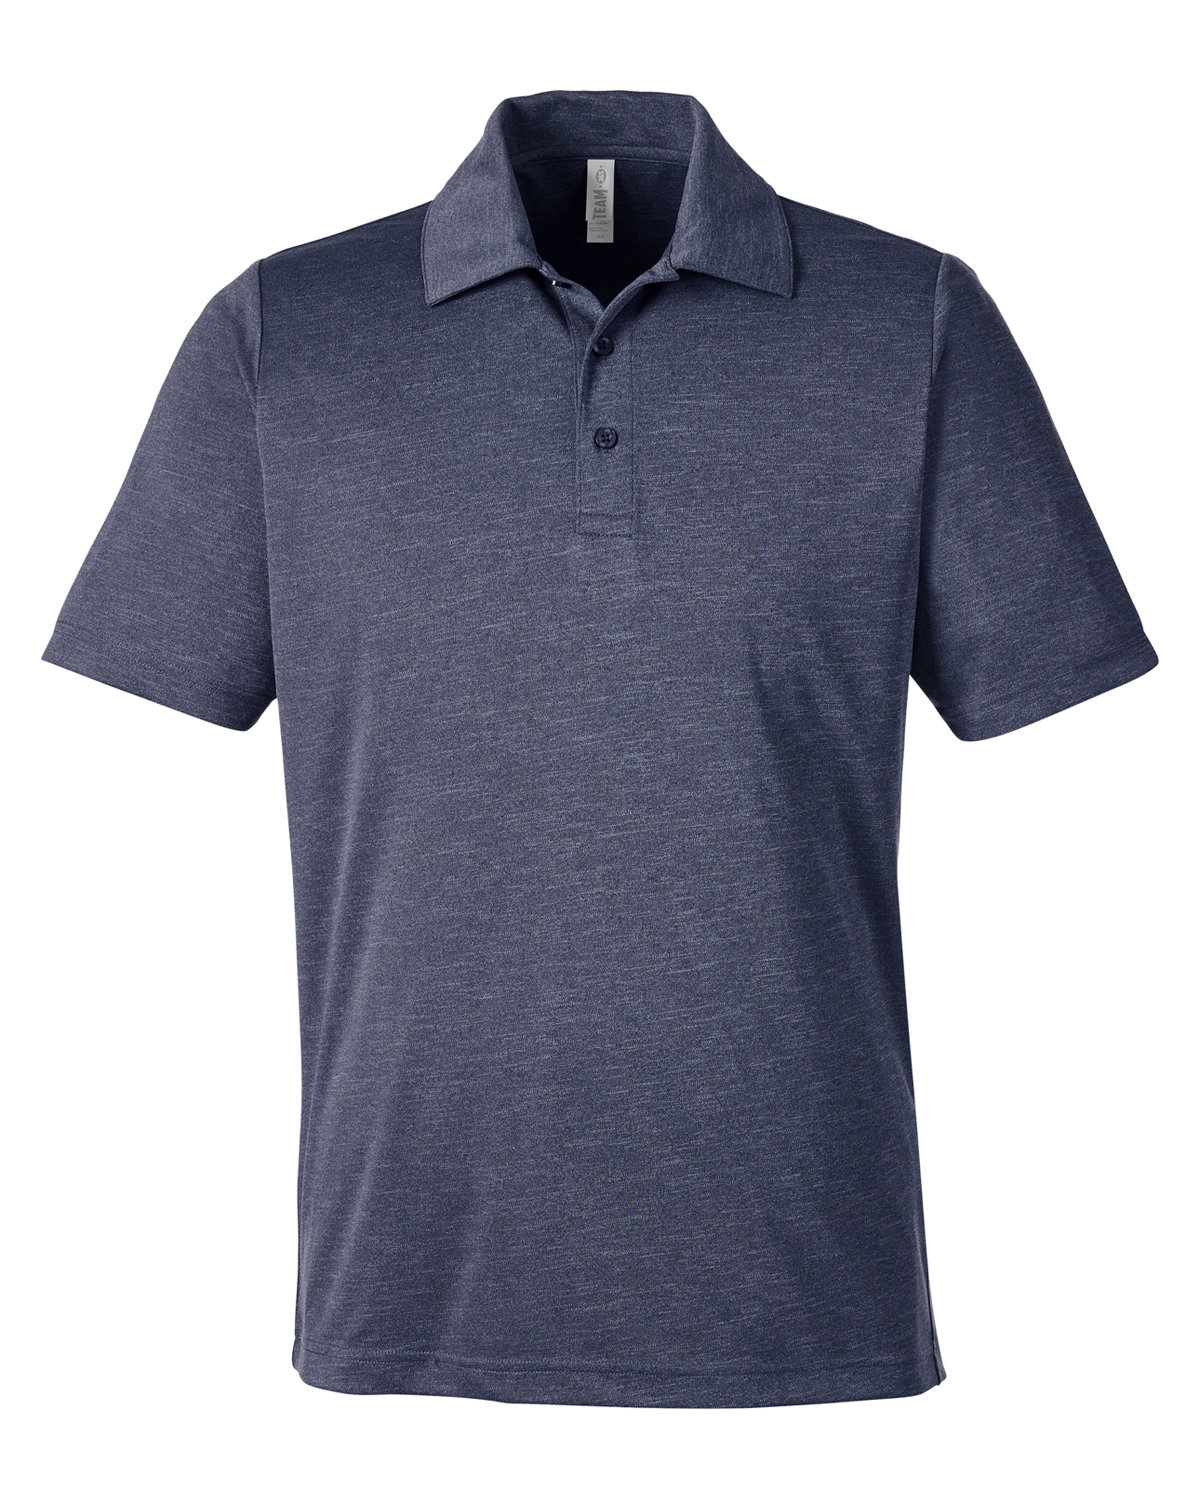 Picture of Team 365 Men's Zone Sonic Heather Performance Polo